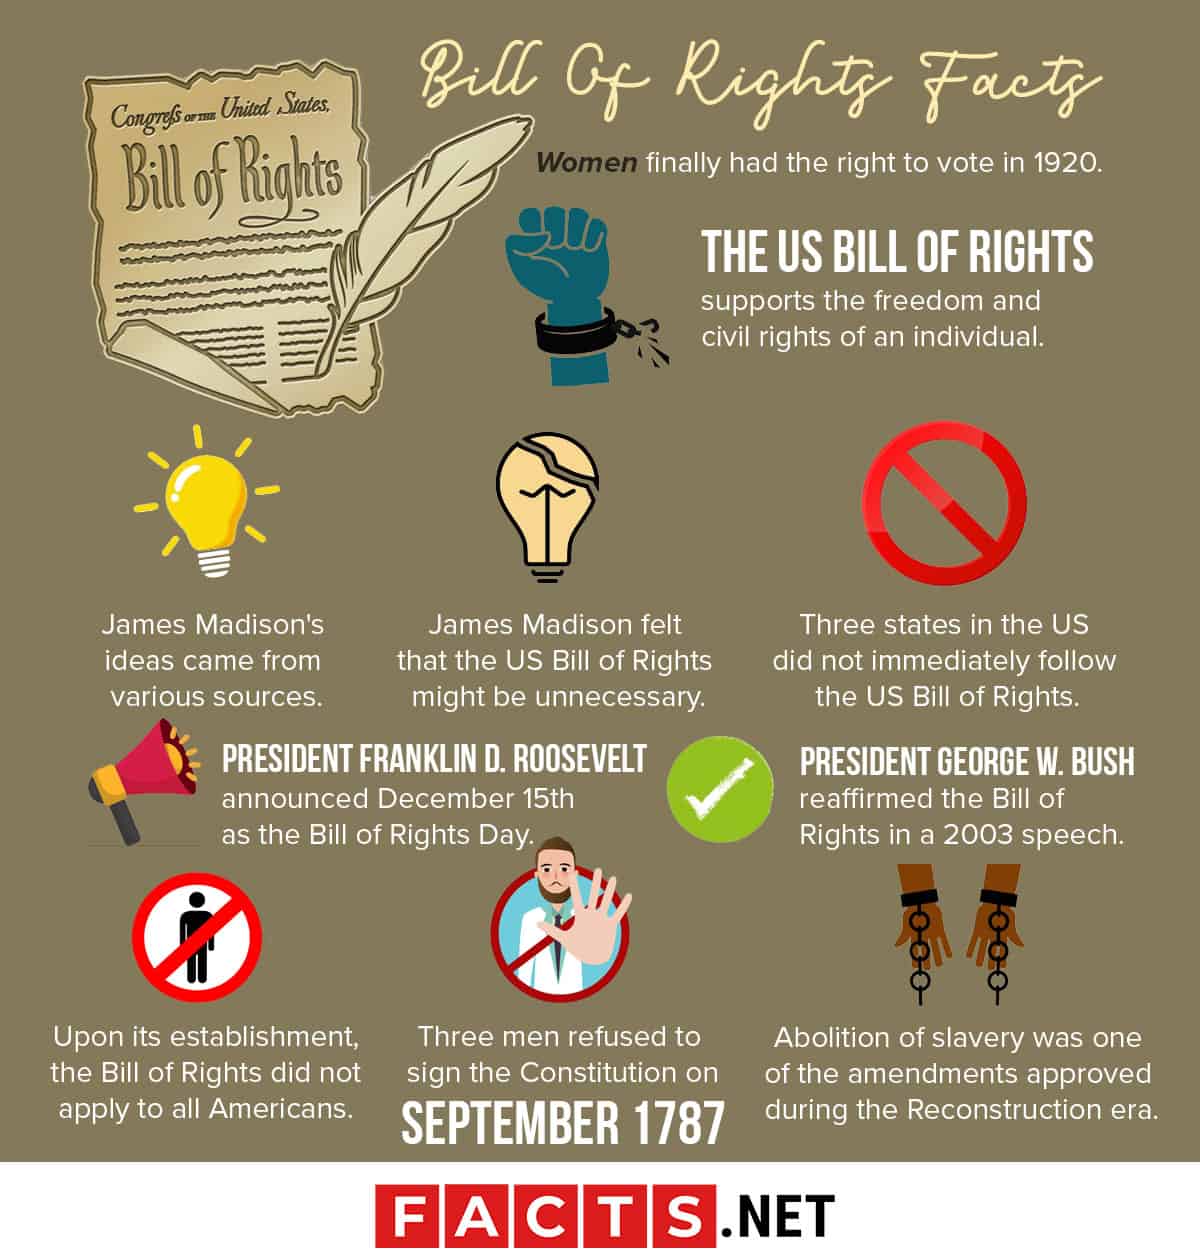 assignment 02.05 the bill of rights